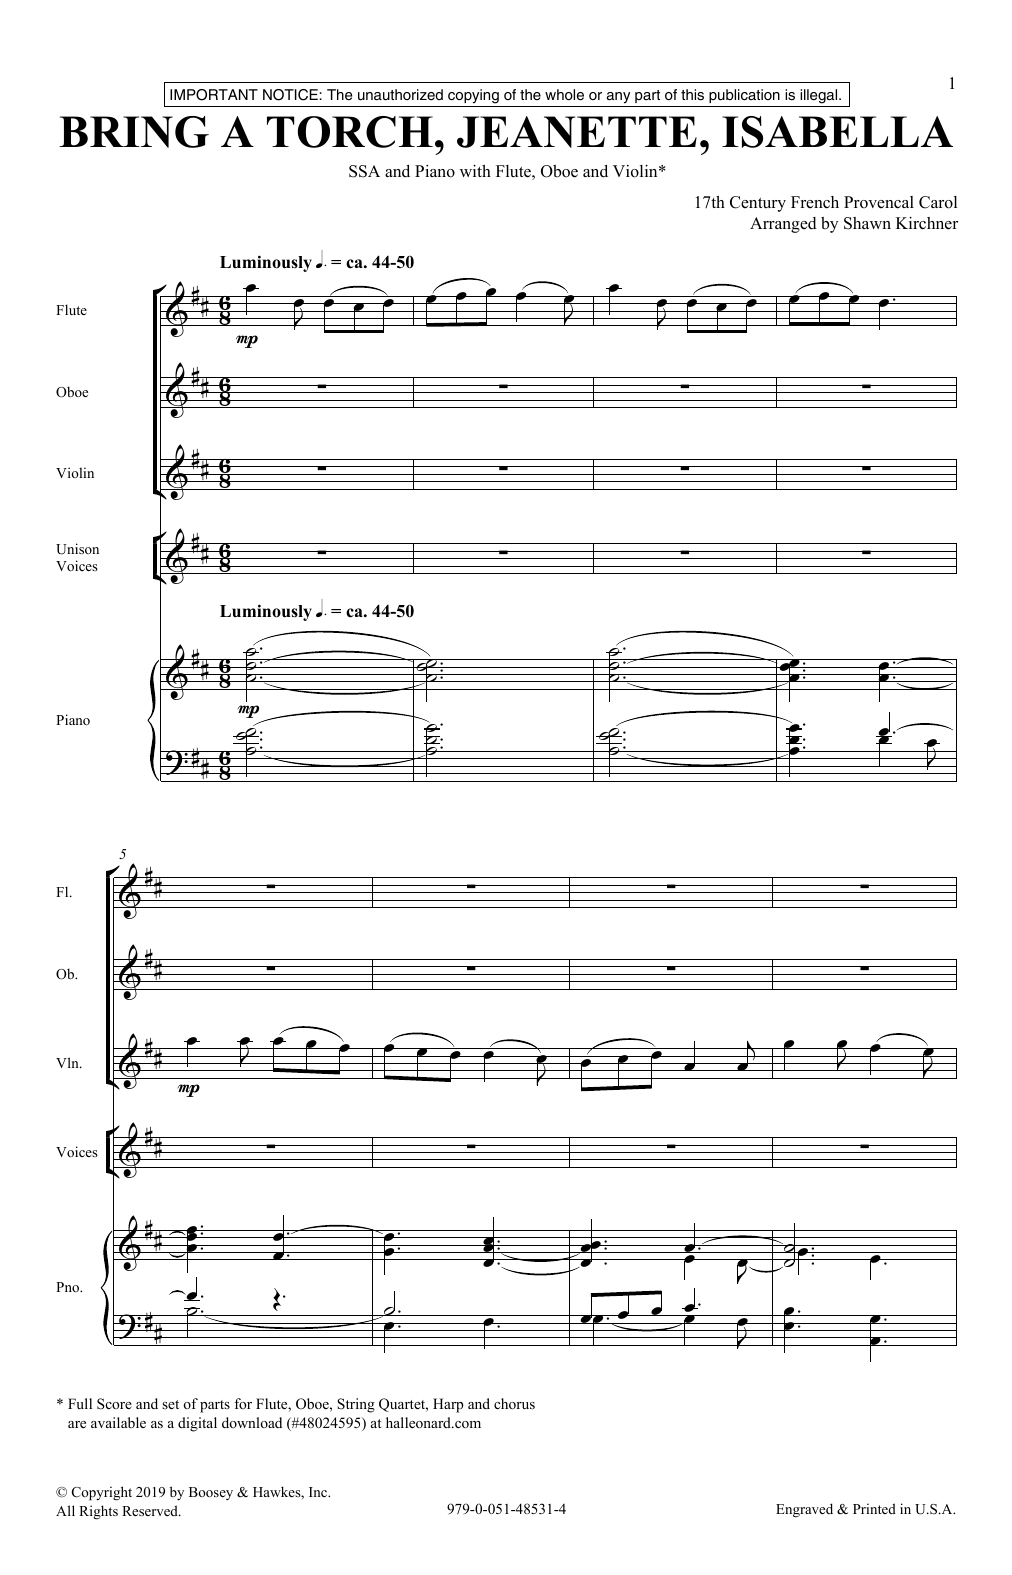 Download 17th Century French Provencal Bring A Torch, Jeannette, Isabella (arr Sheet Music